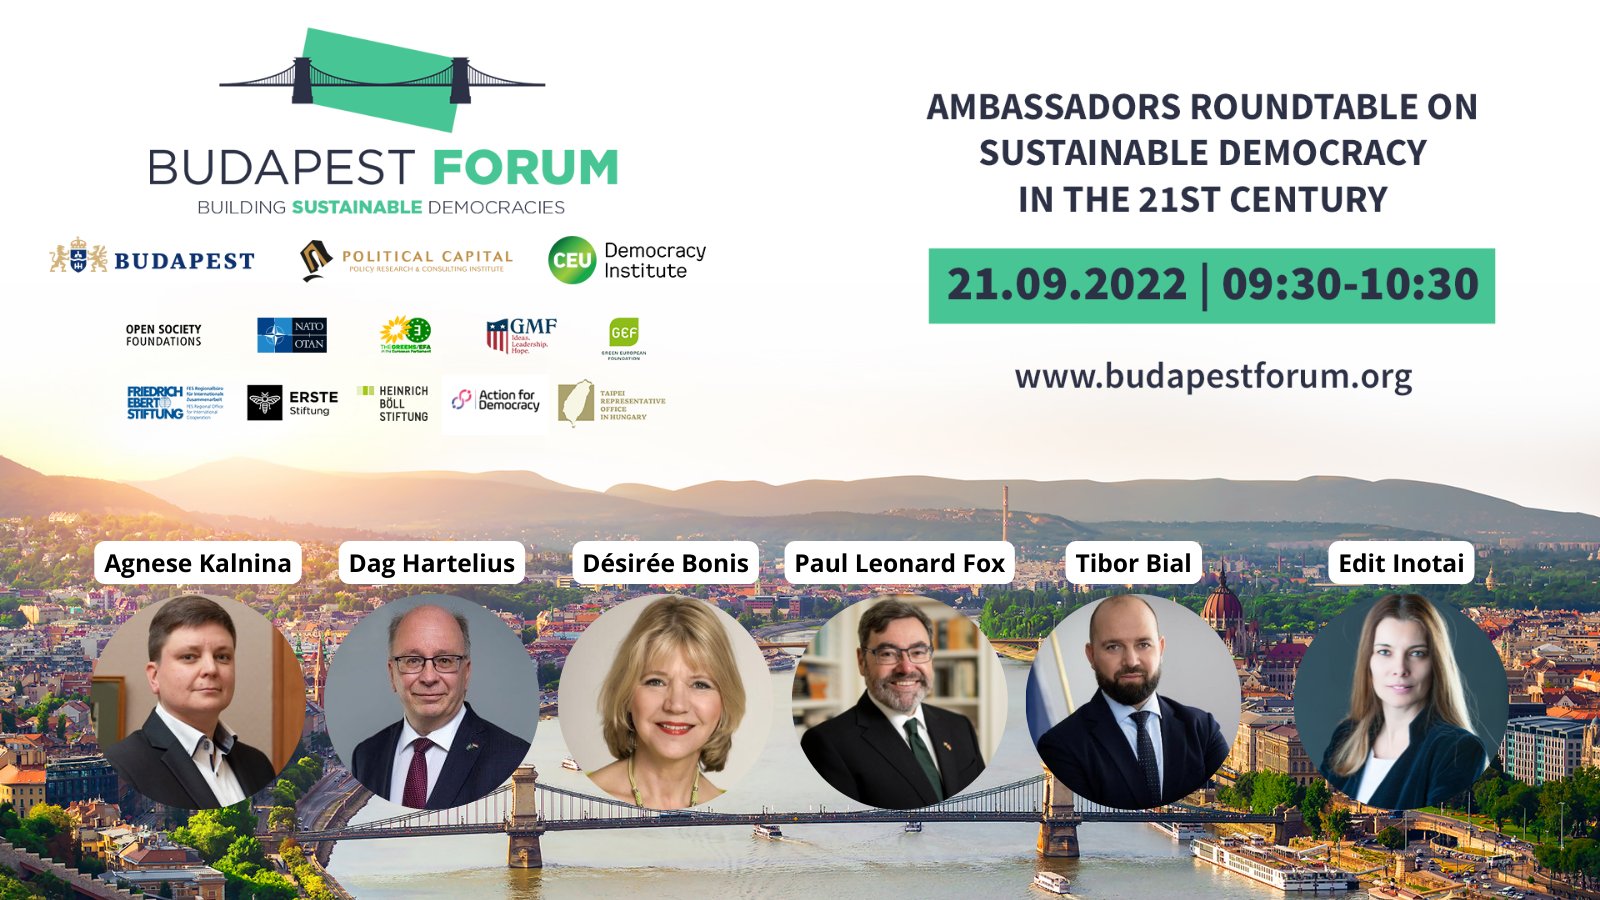 Watch: Ambassadors in Budapest on Sustainable Democracy in 21st Century